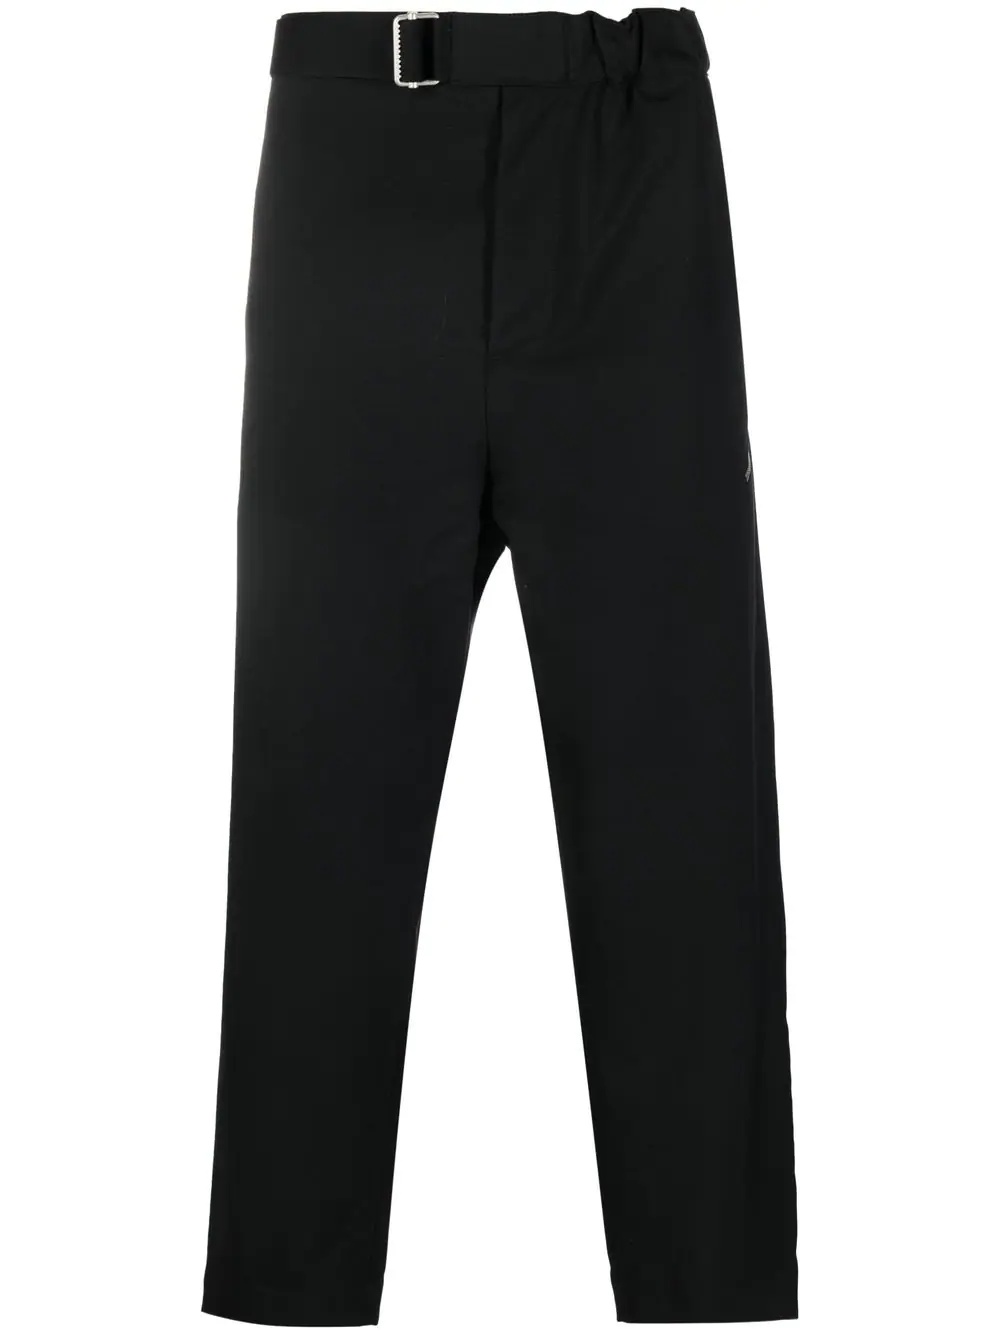 belted-waist straight trousers - 1